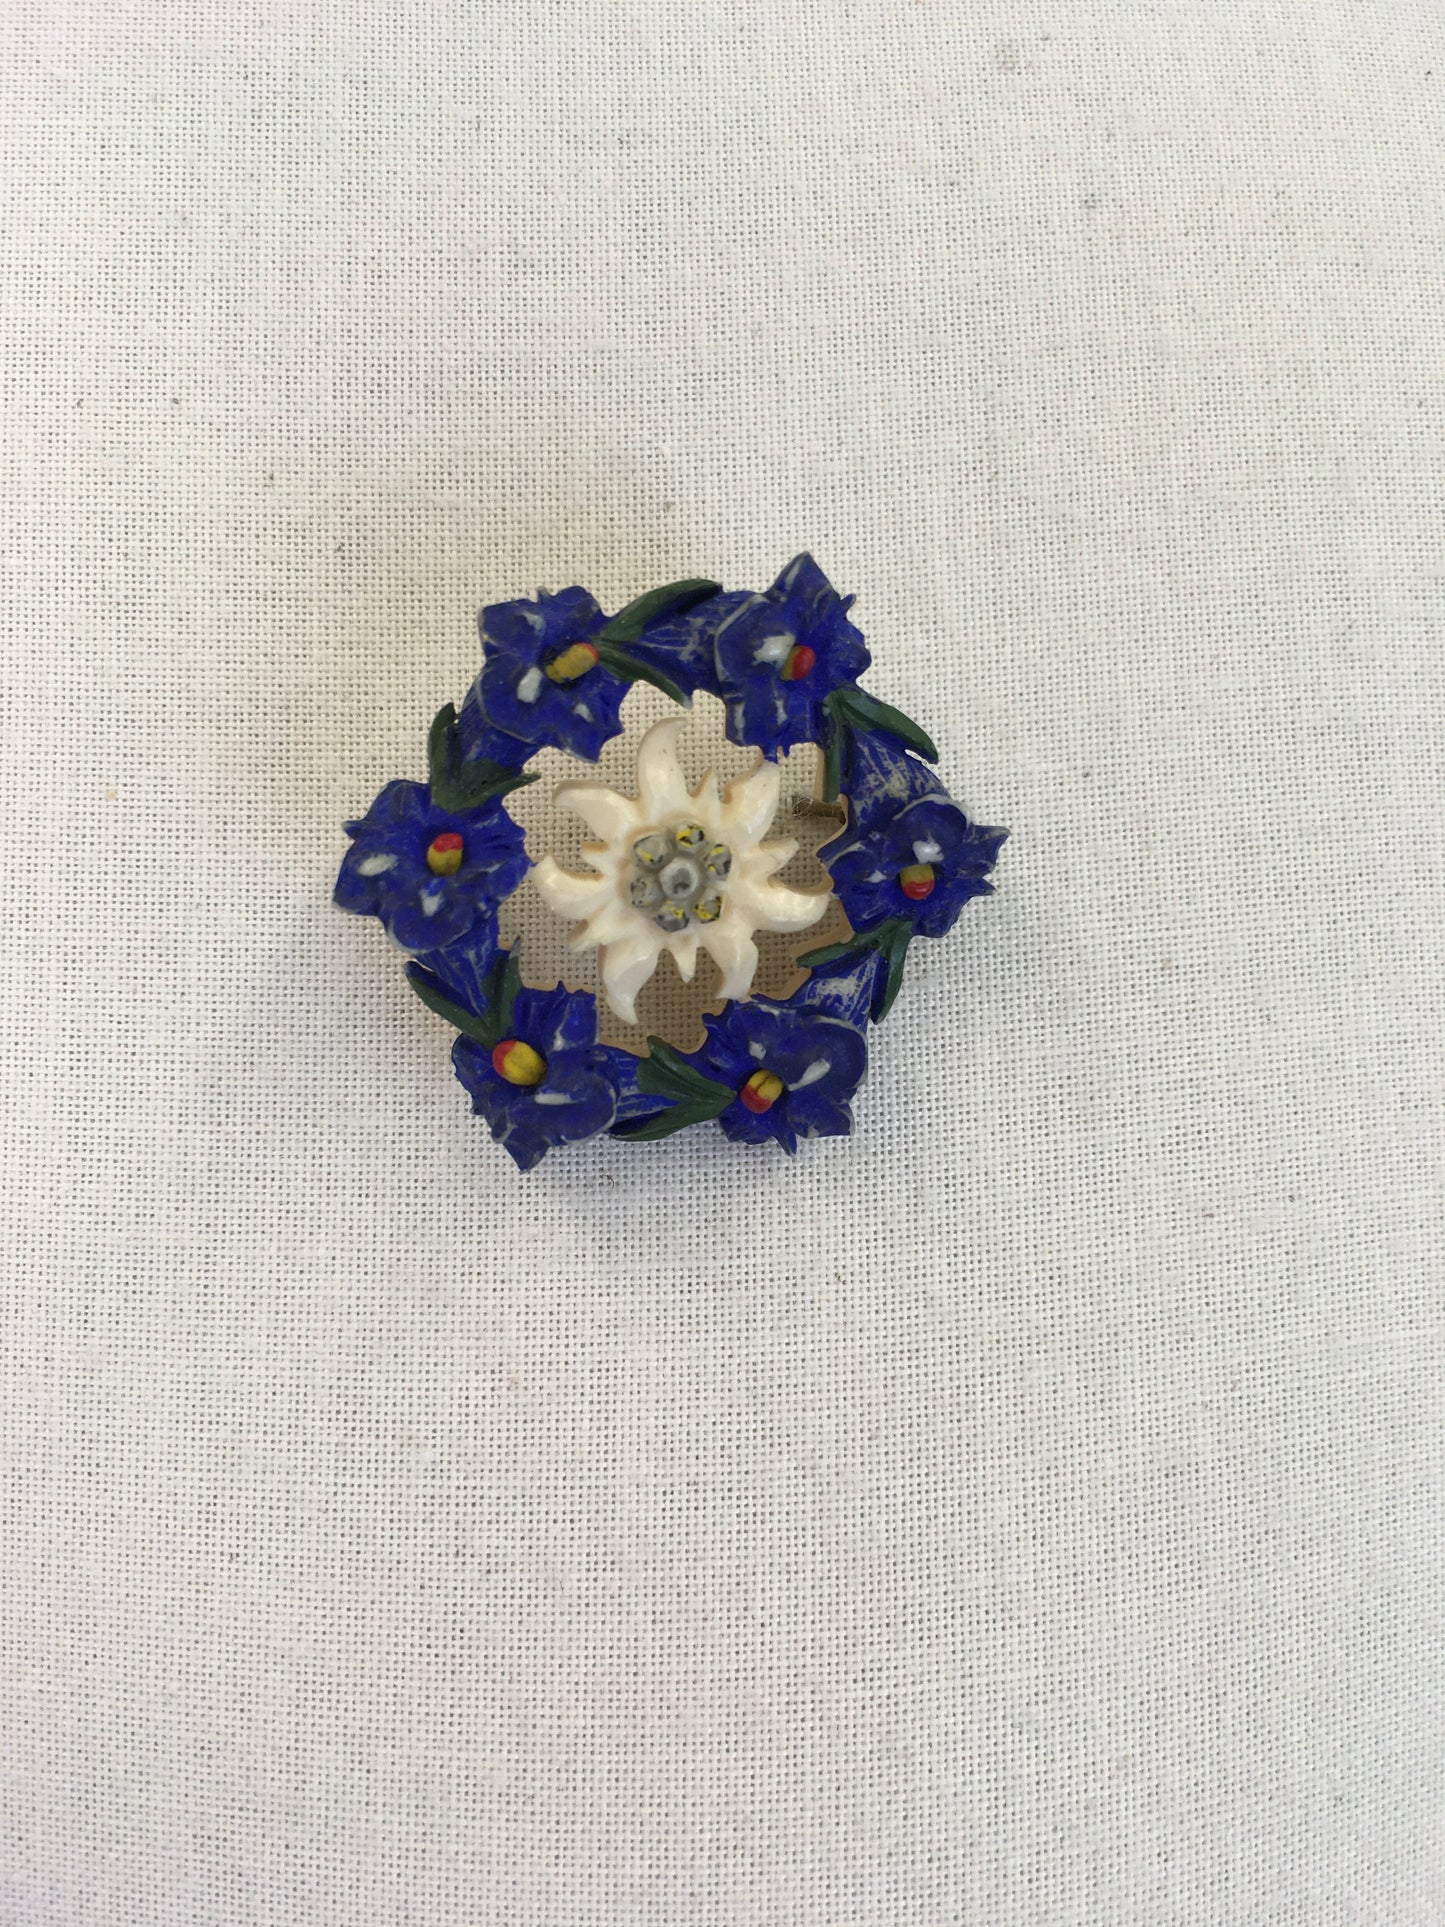 Original 1940s Celluloid Edelweiss Brooch in a Floral Garland - In a Lovely Colour Pallet